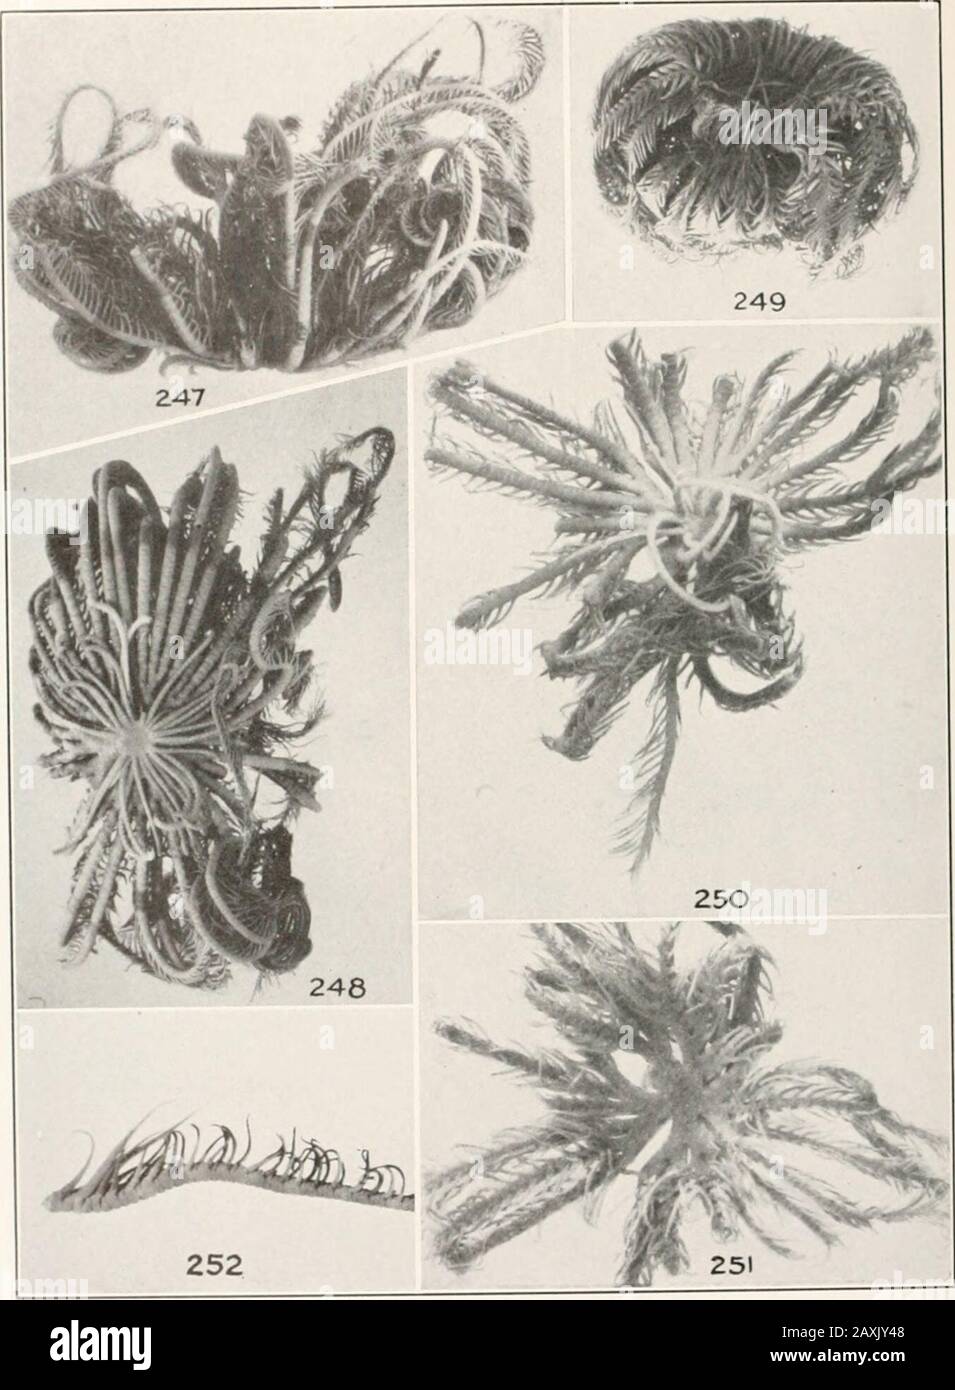 Bulletin - United States National Museum . 240-242, Liparometra articulata: 240, 241. Specimen from Siboga station Vht (U.S N.M., 1 . :s ; 242 iximal pinnules, X 2.24.5-246, Lampromelra palmata palmata: 243, 244, nens from Singapore (C. M.); 245, specimen from New Guinea (Berl. Mus.); 246, the central portion of a vcrj large specime Sibogr, station 115, reef (Amsterdam Mus.). U S. NATIONAL MUSEUM BULLETIN 82. PART 4A PLATE 54. ?nprometra palmata palmata: 247, 248, I I ? type specin don aequipinna from an ui. locality (H. M.)i 249, specimen from Mortlock Island, Carolines (H. M.); 250, 251, th Stock Photo